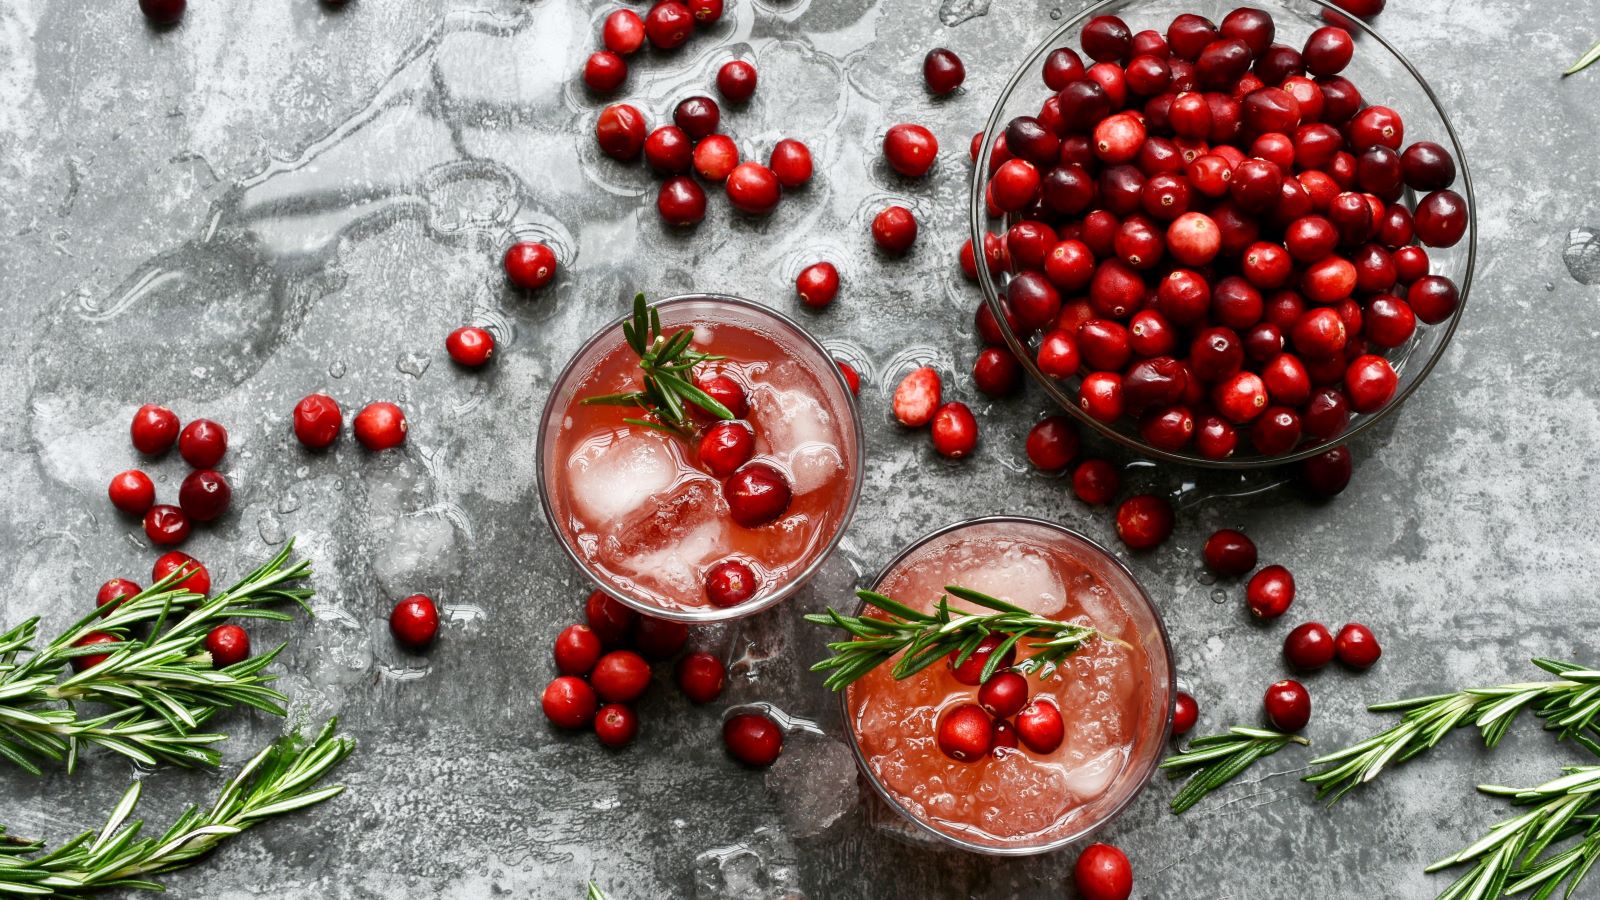 Can cranberry juice really prevent UTIs? Some research suggests that it can, but the jury's still out. Here's what an expert has to say.